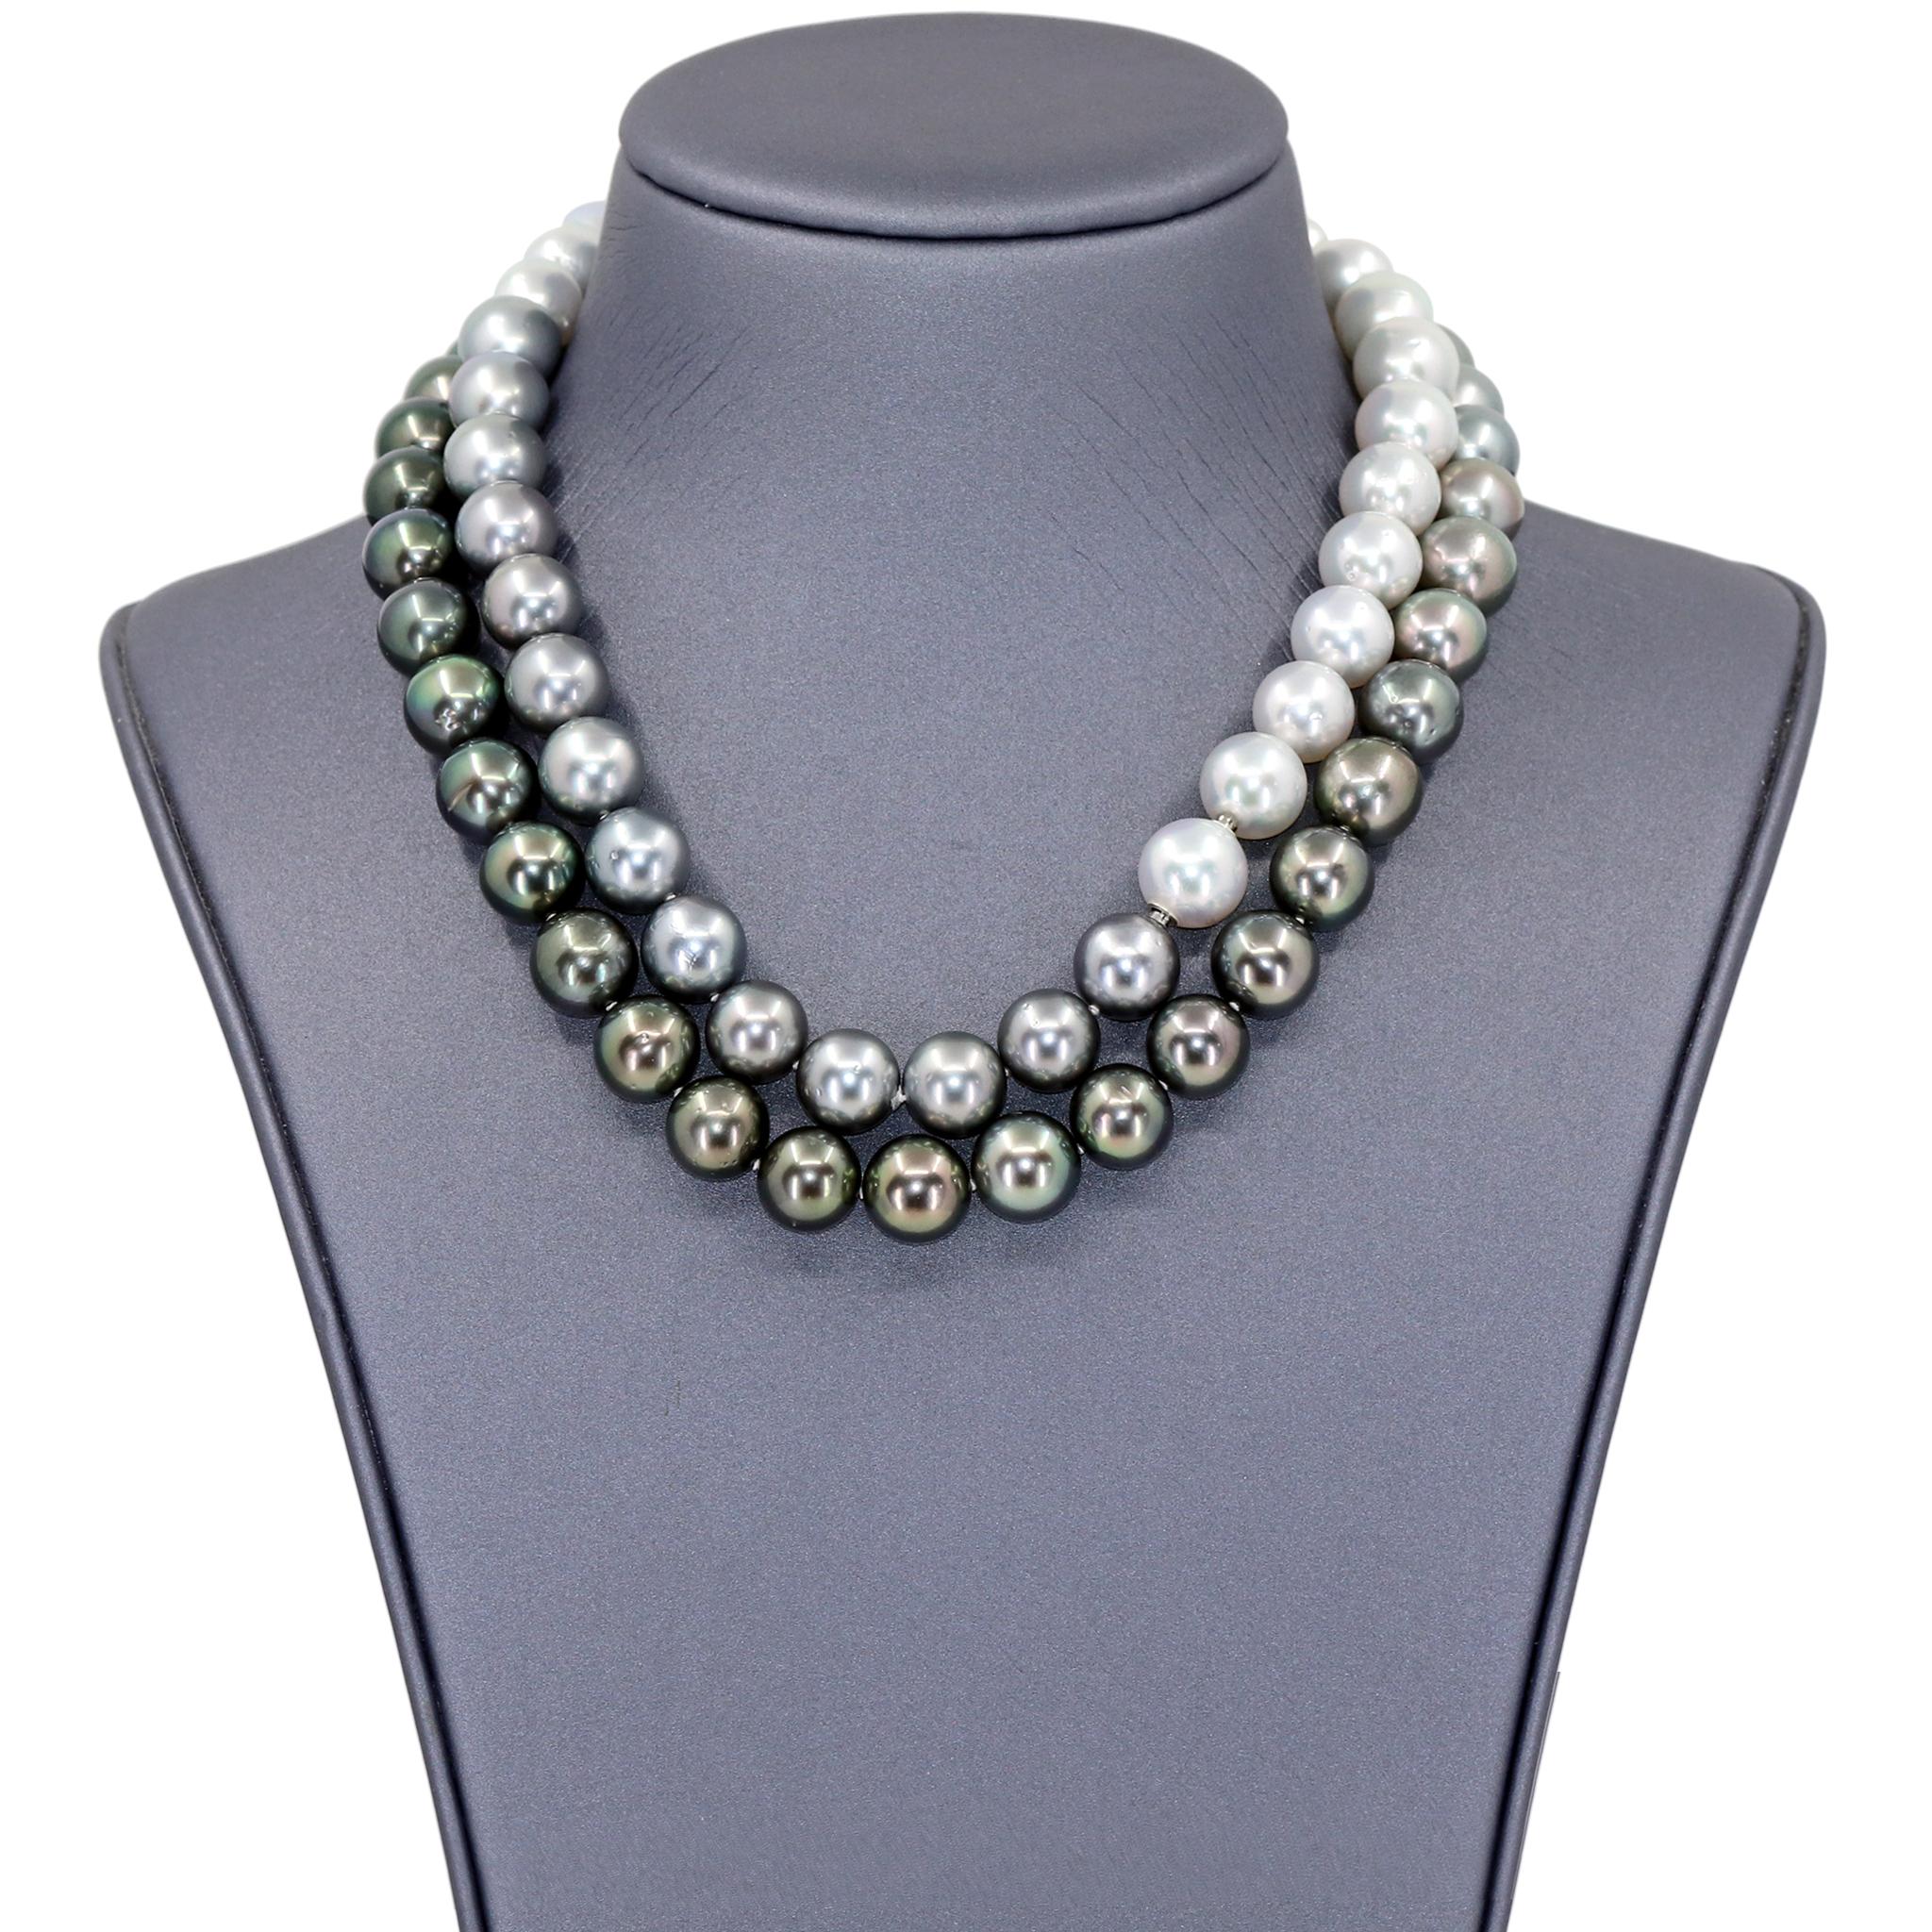 Artisan Atelier Zobel Ombré Tahitian and South Sea Pearl Multilength Necklaces